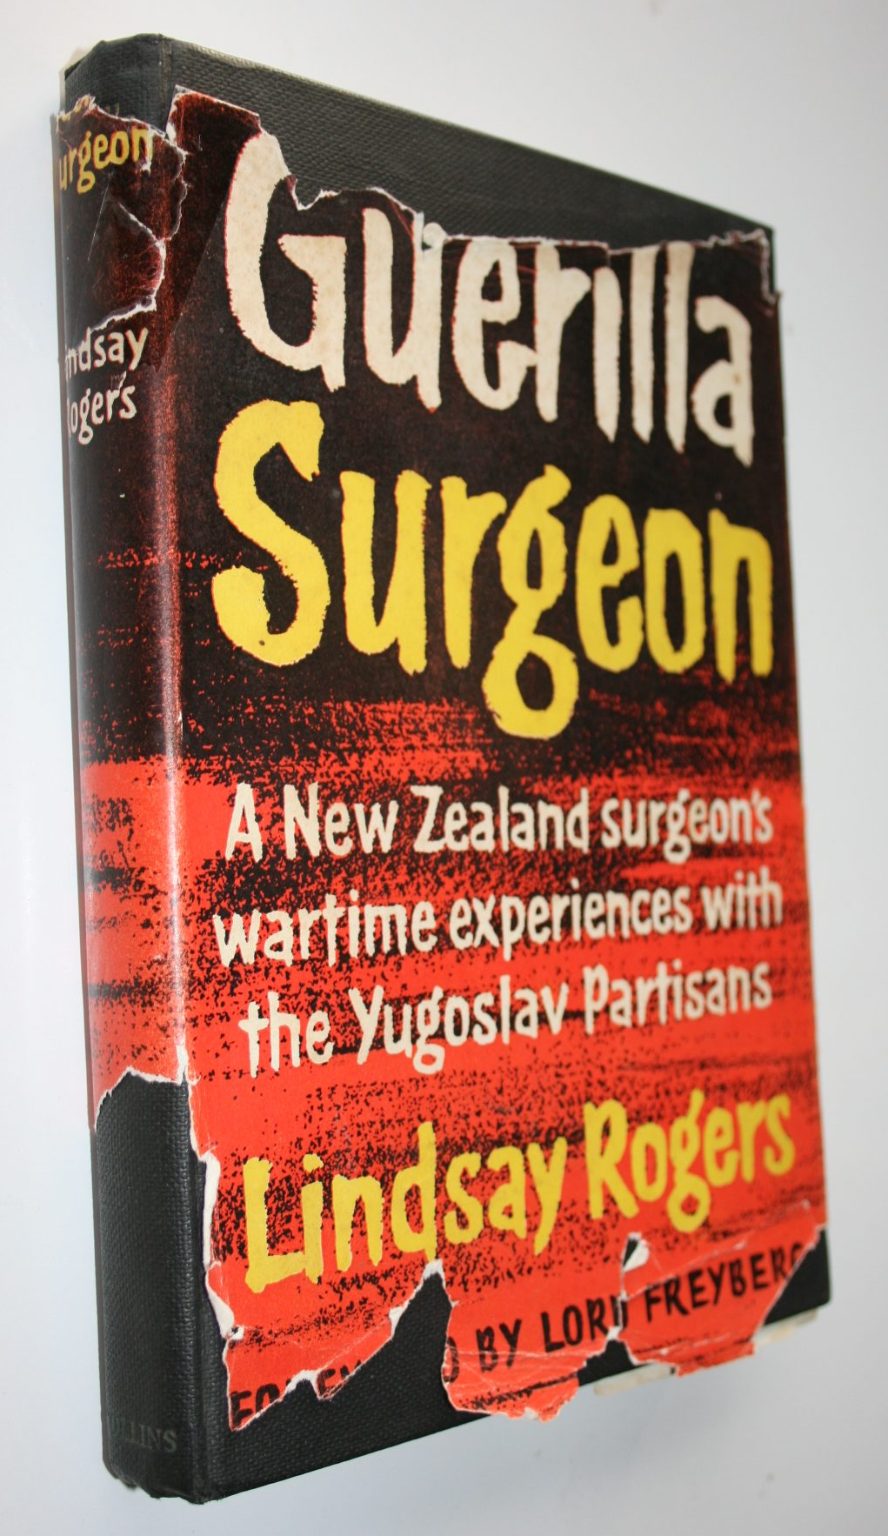 Guerilla Surgeon. A New Zealand surgeon's wartime experiences with the Yugoslav Partisans. by Lindsay Rogers. SIGNED BY AUTHOR. VERY SCARCE SIGNED COPY.